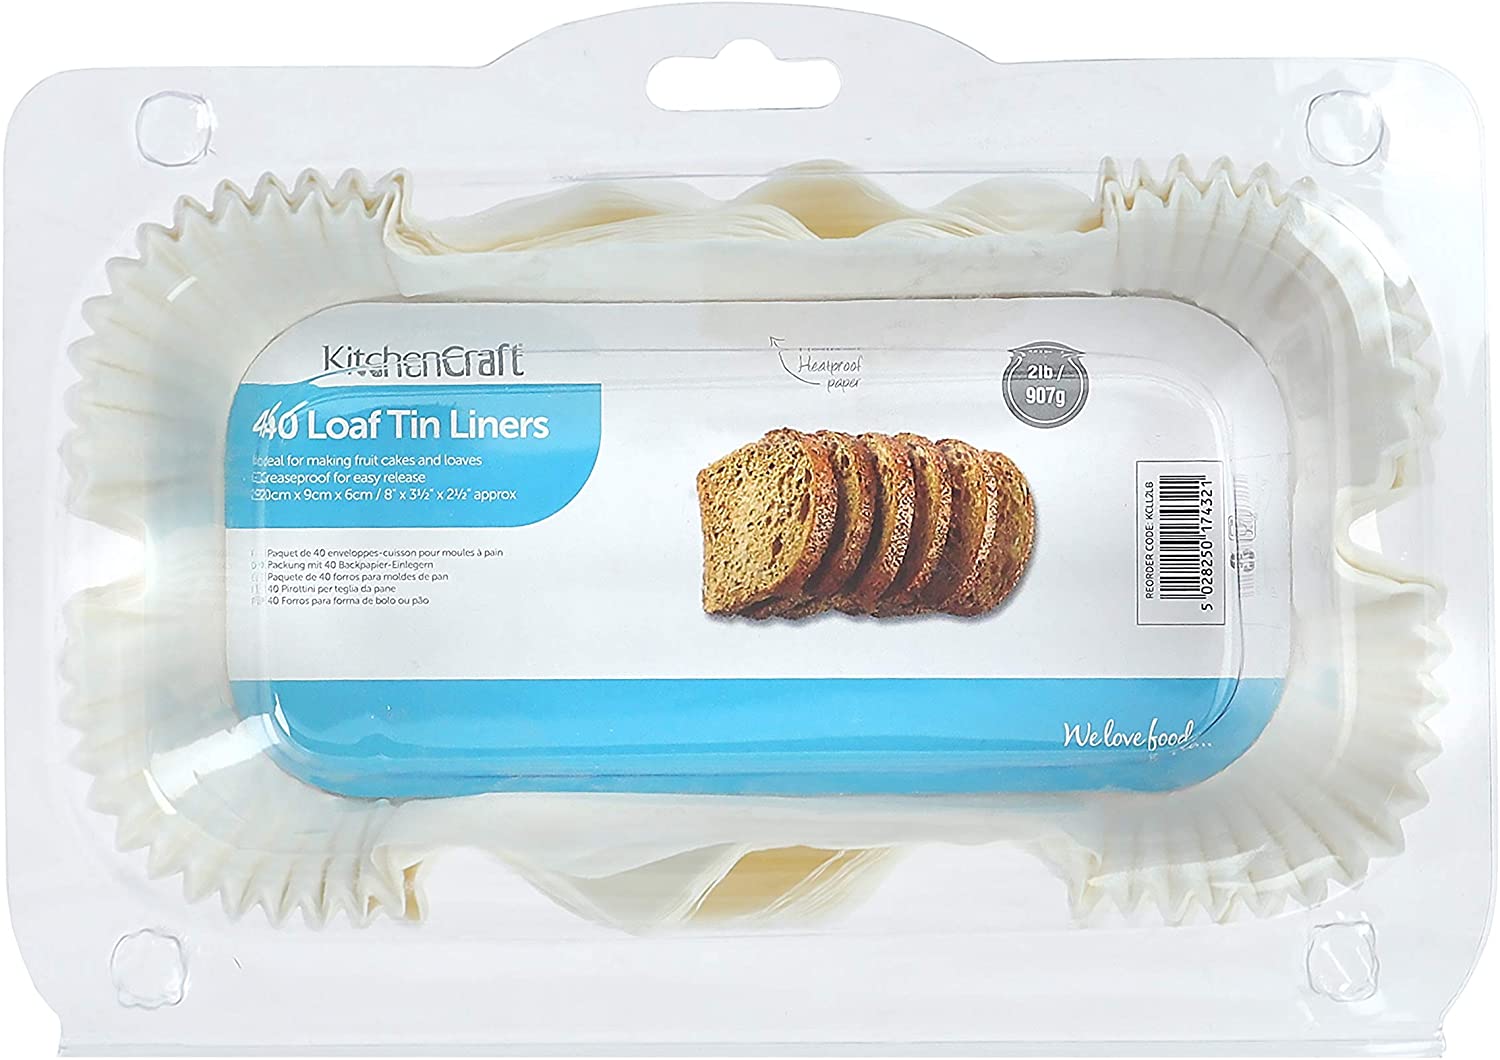 KitchenCraft Kitchen Craft Non-Stick 2 lb Loaf Tin Liners (Pack of 40)